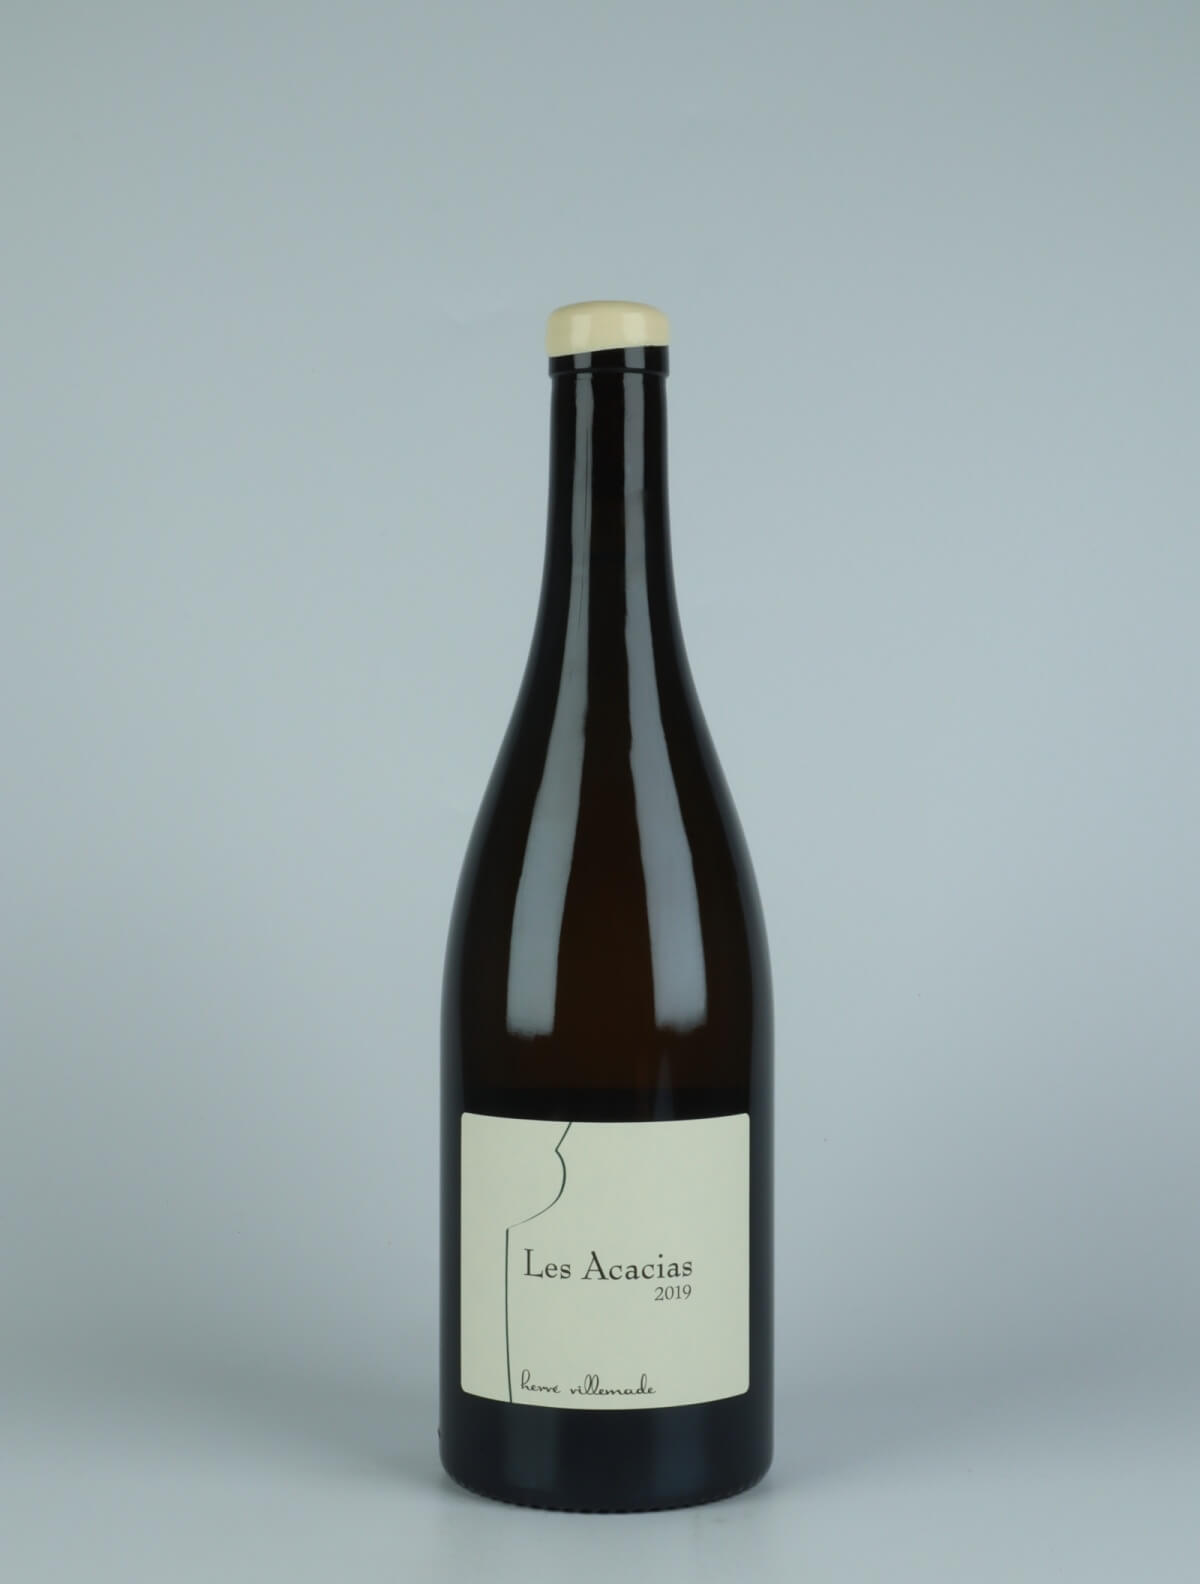 A bottle 2019 Les Acacias White wine from Hervé Villemade, Loire in France